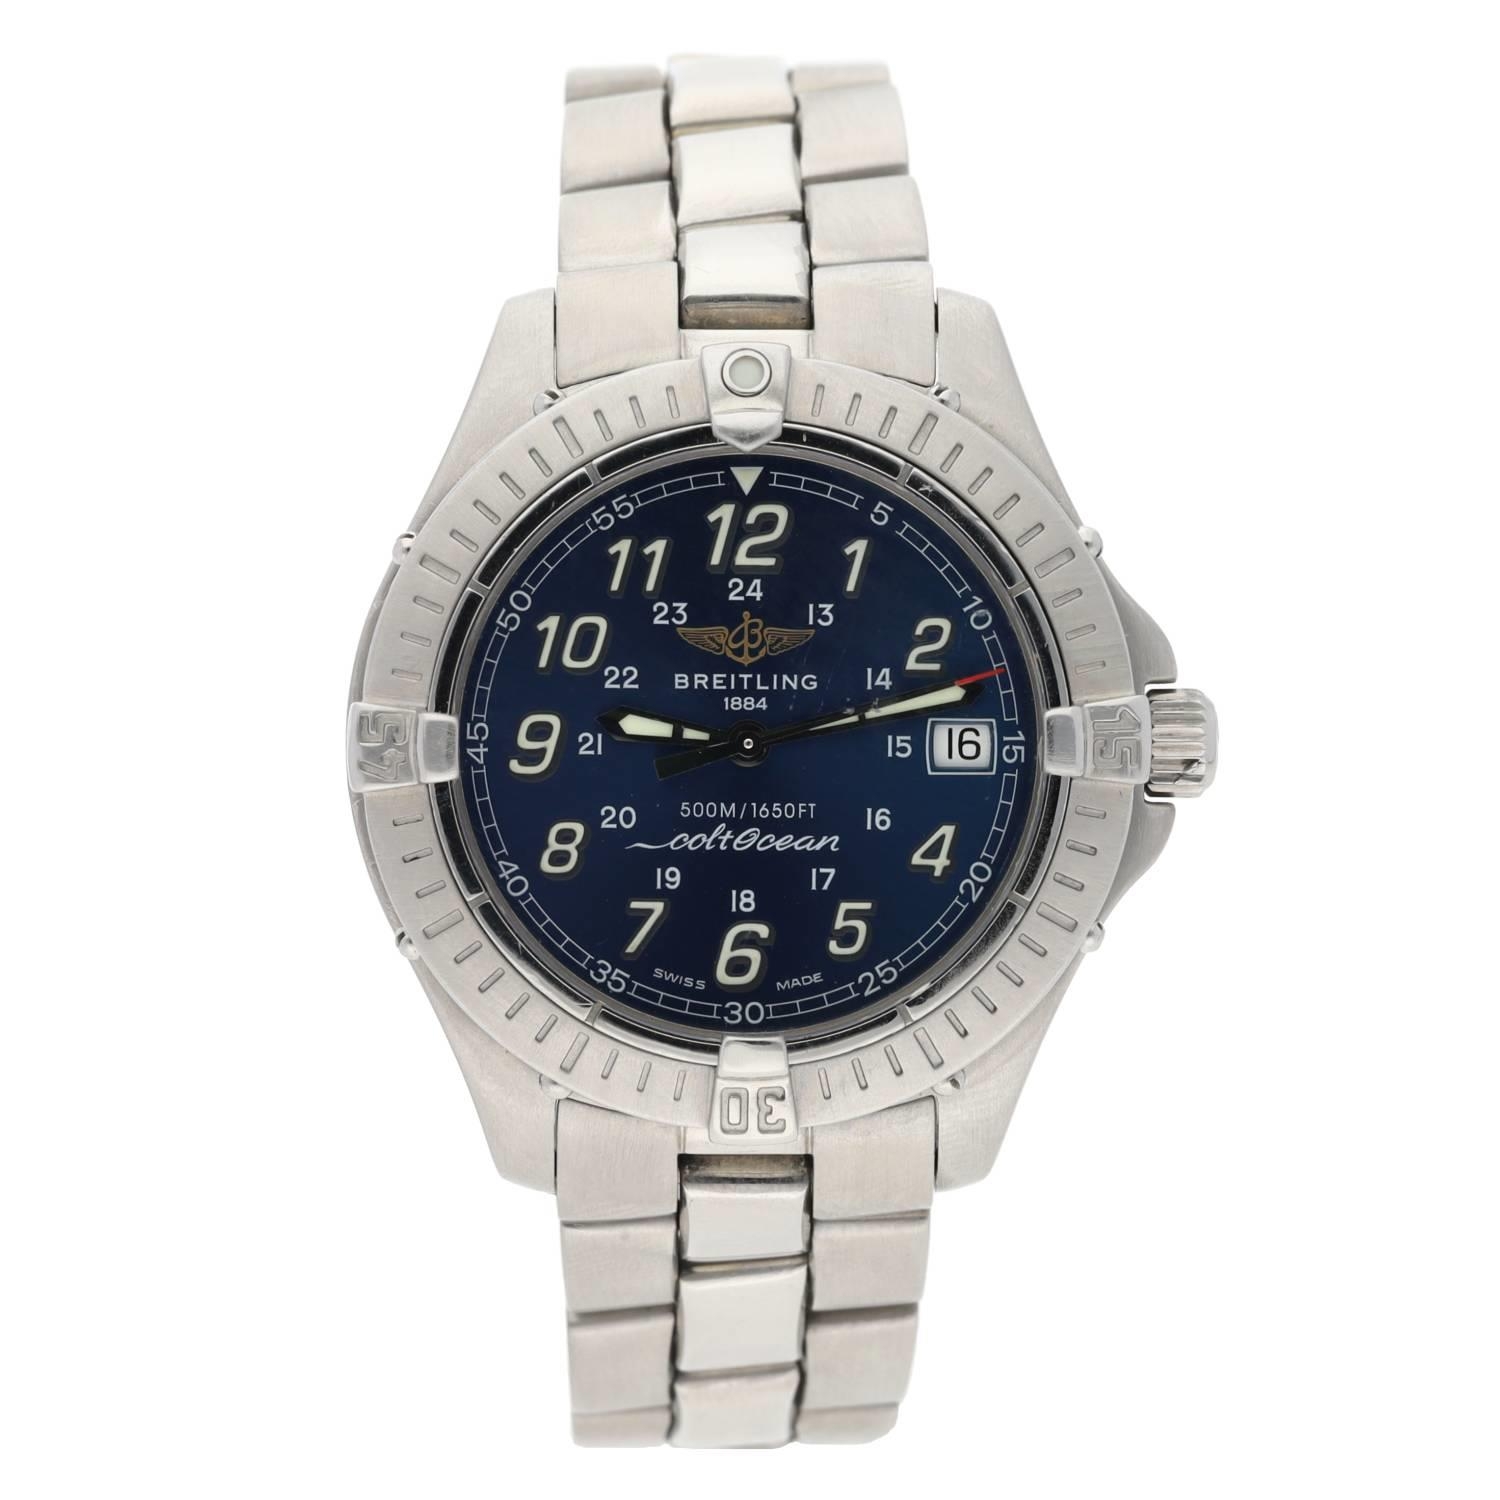 Breitling Colt Ocean stainless steel gentleman's wristwatch, reference no. A64050, serial no. - Image 2 of 4